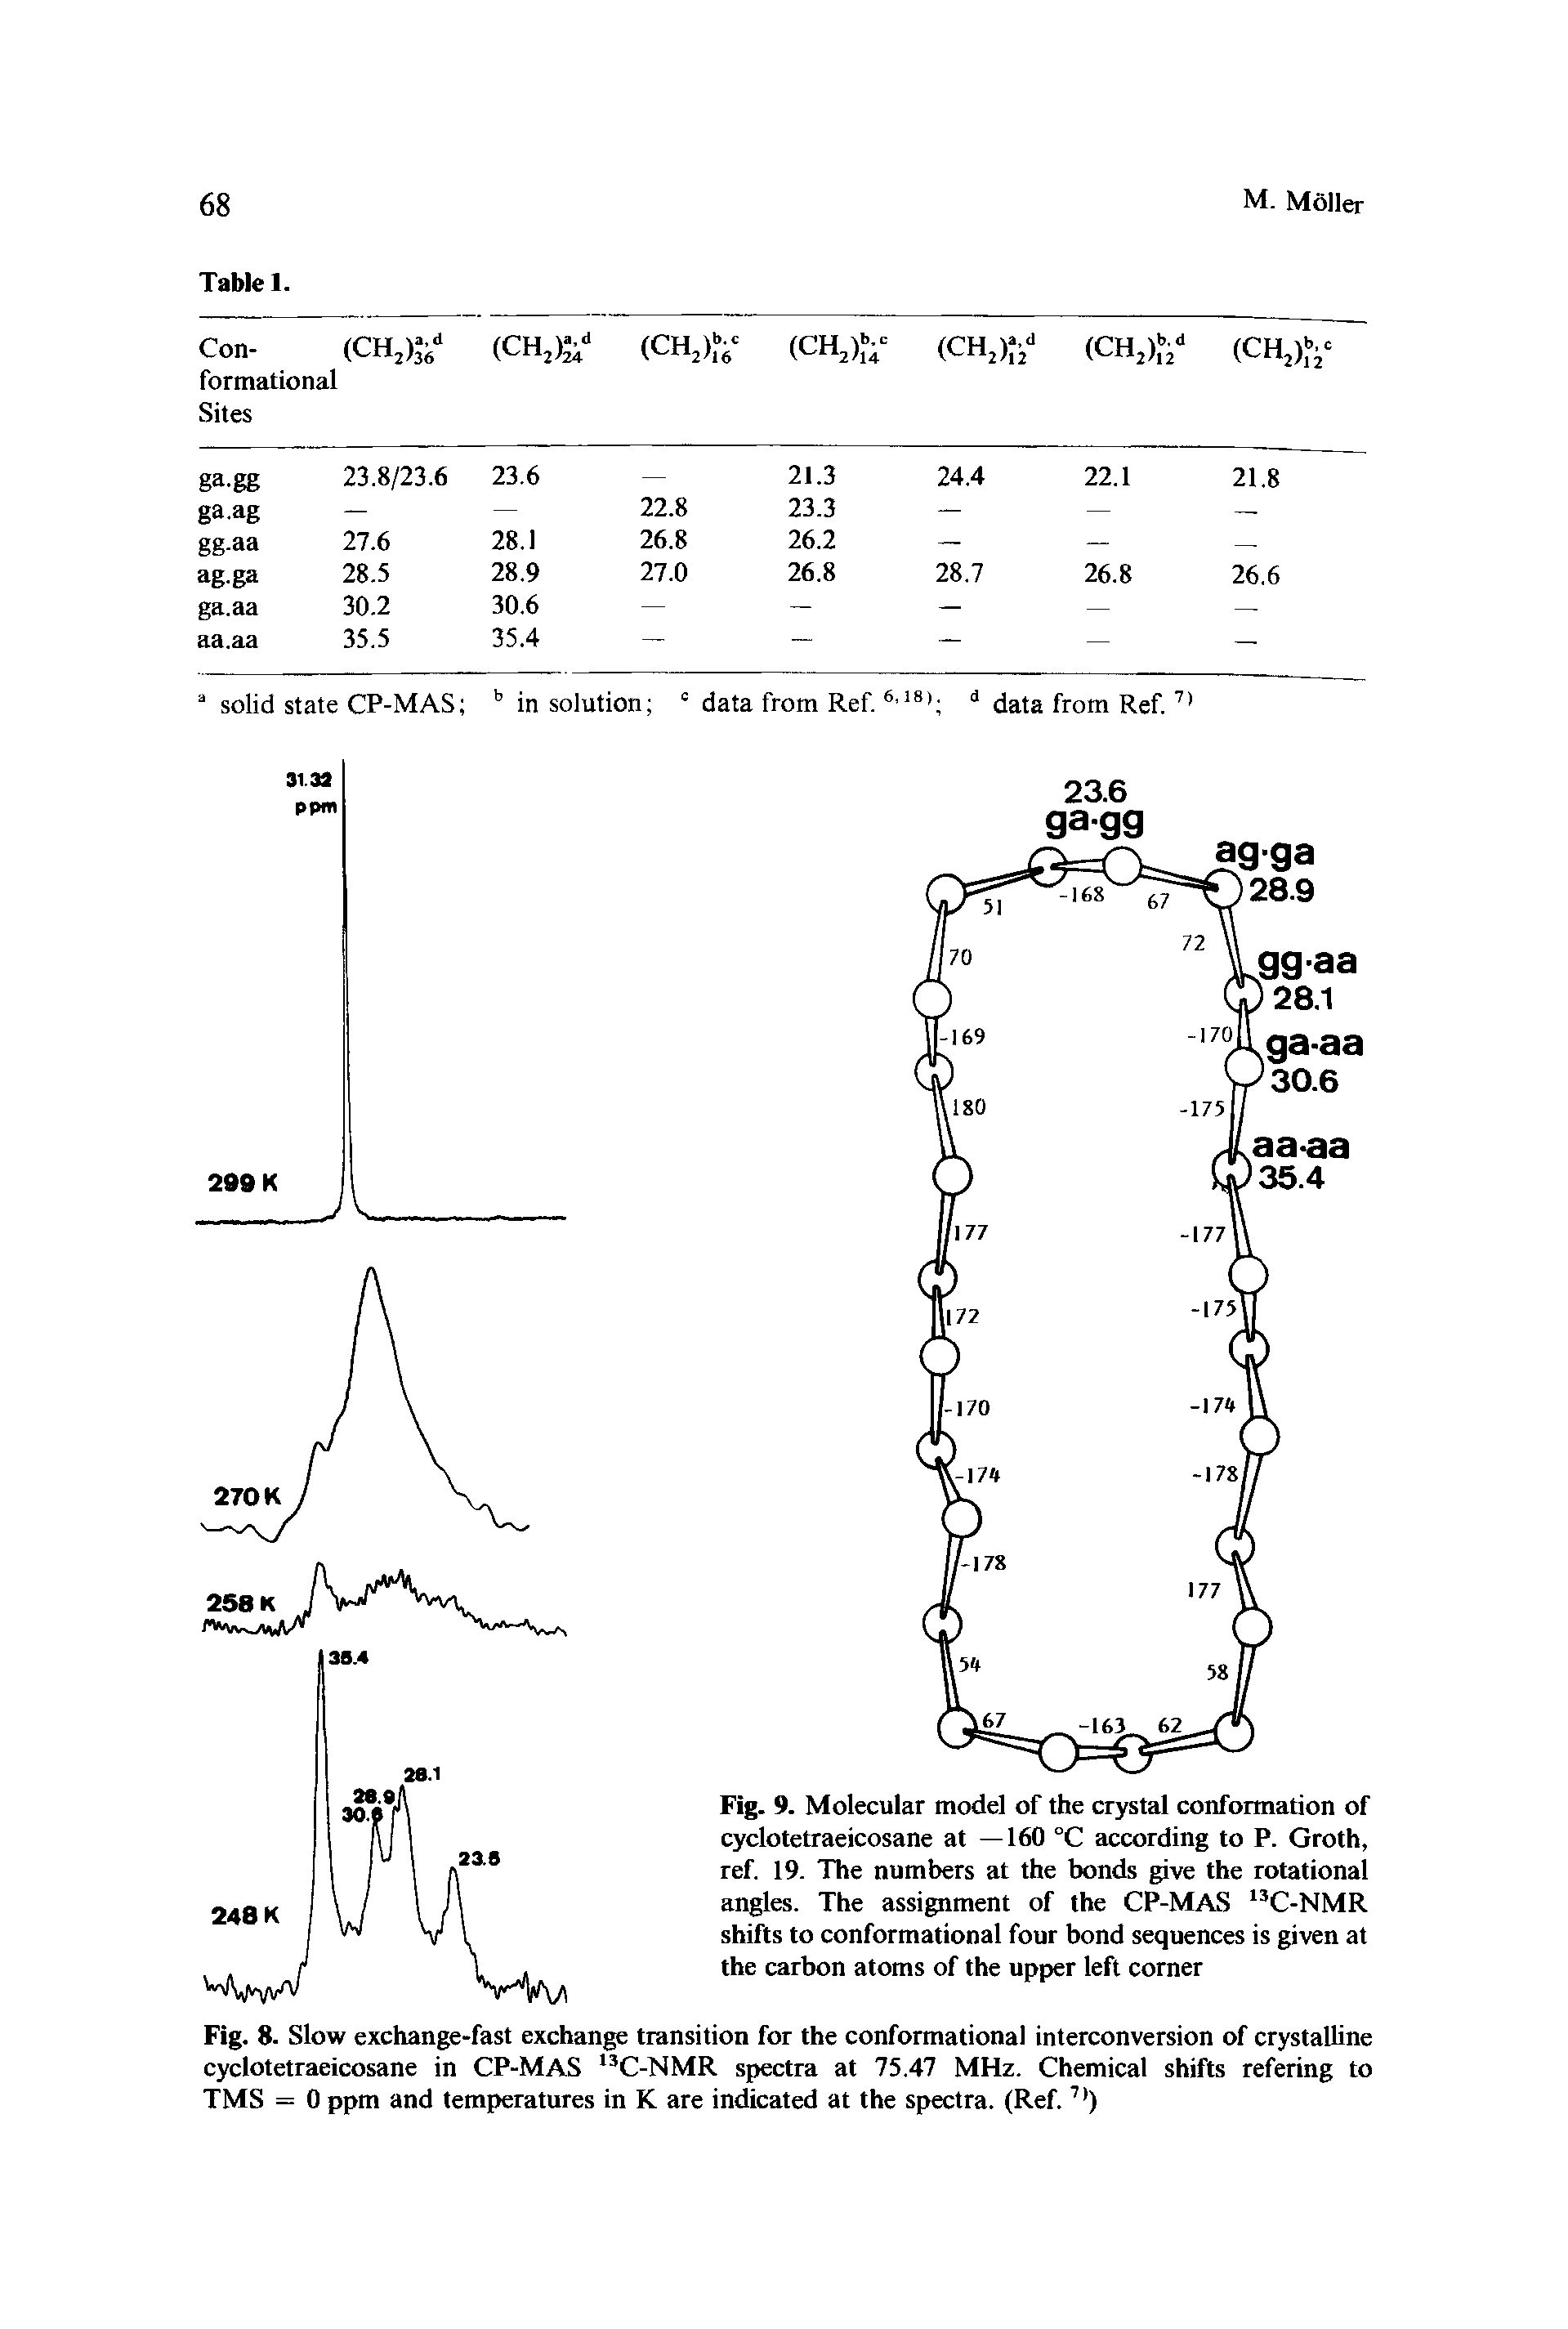 Fig. 9. Molecular model of the crystal conformation of cyclotetraeicosane at —160 °C according to P. Groth, ref. 19. The numbers at the bonds give the rotational angles. The assignment of the CP-MAS 13C-NMR shifts to conformational four bond sequences is given at the carbon atoms of the upper left corner...